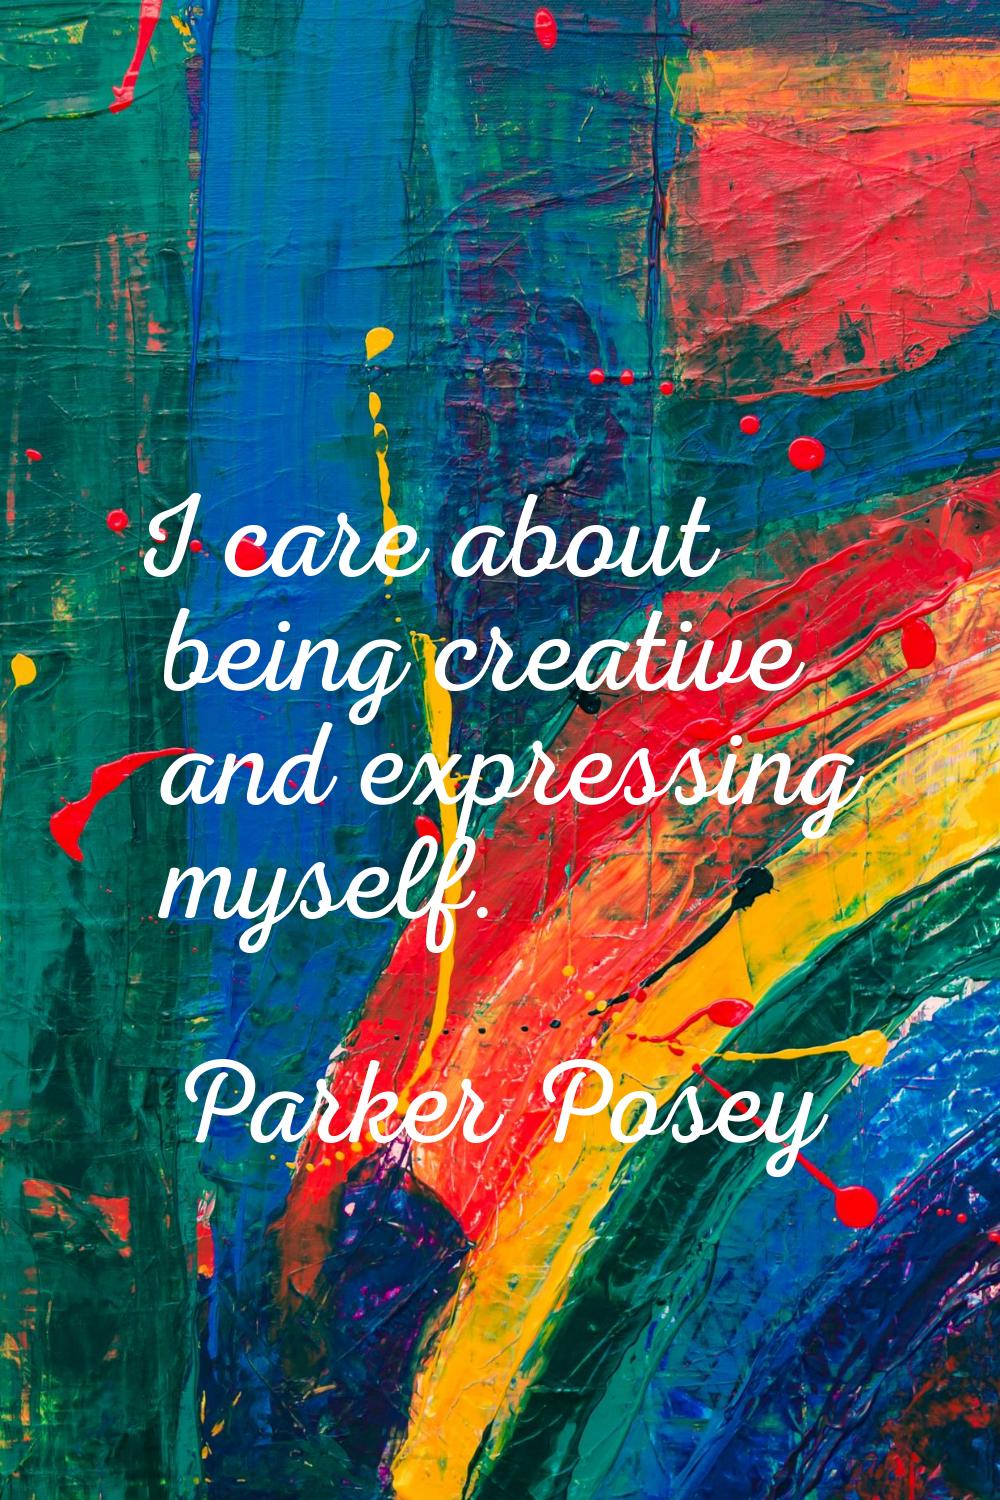 I care about being creative and expressing myself.